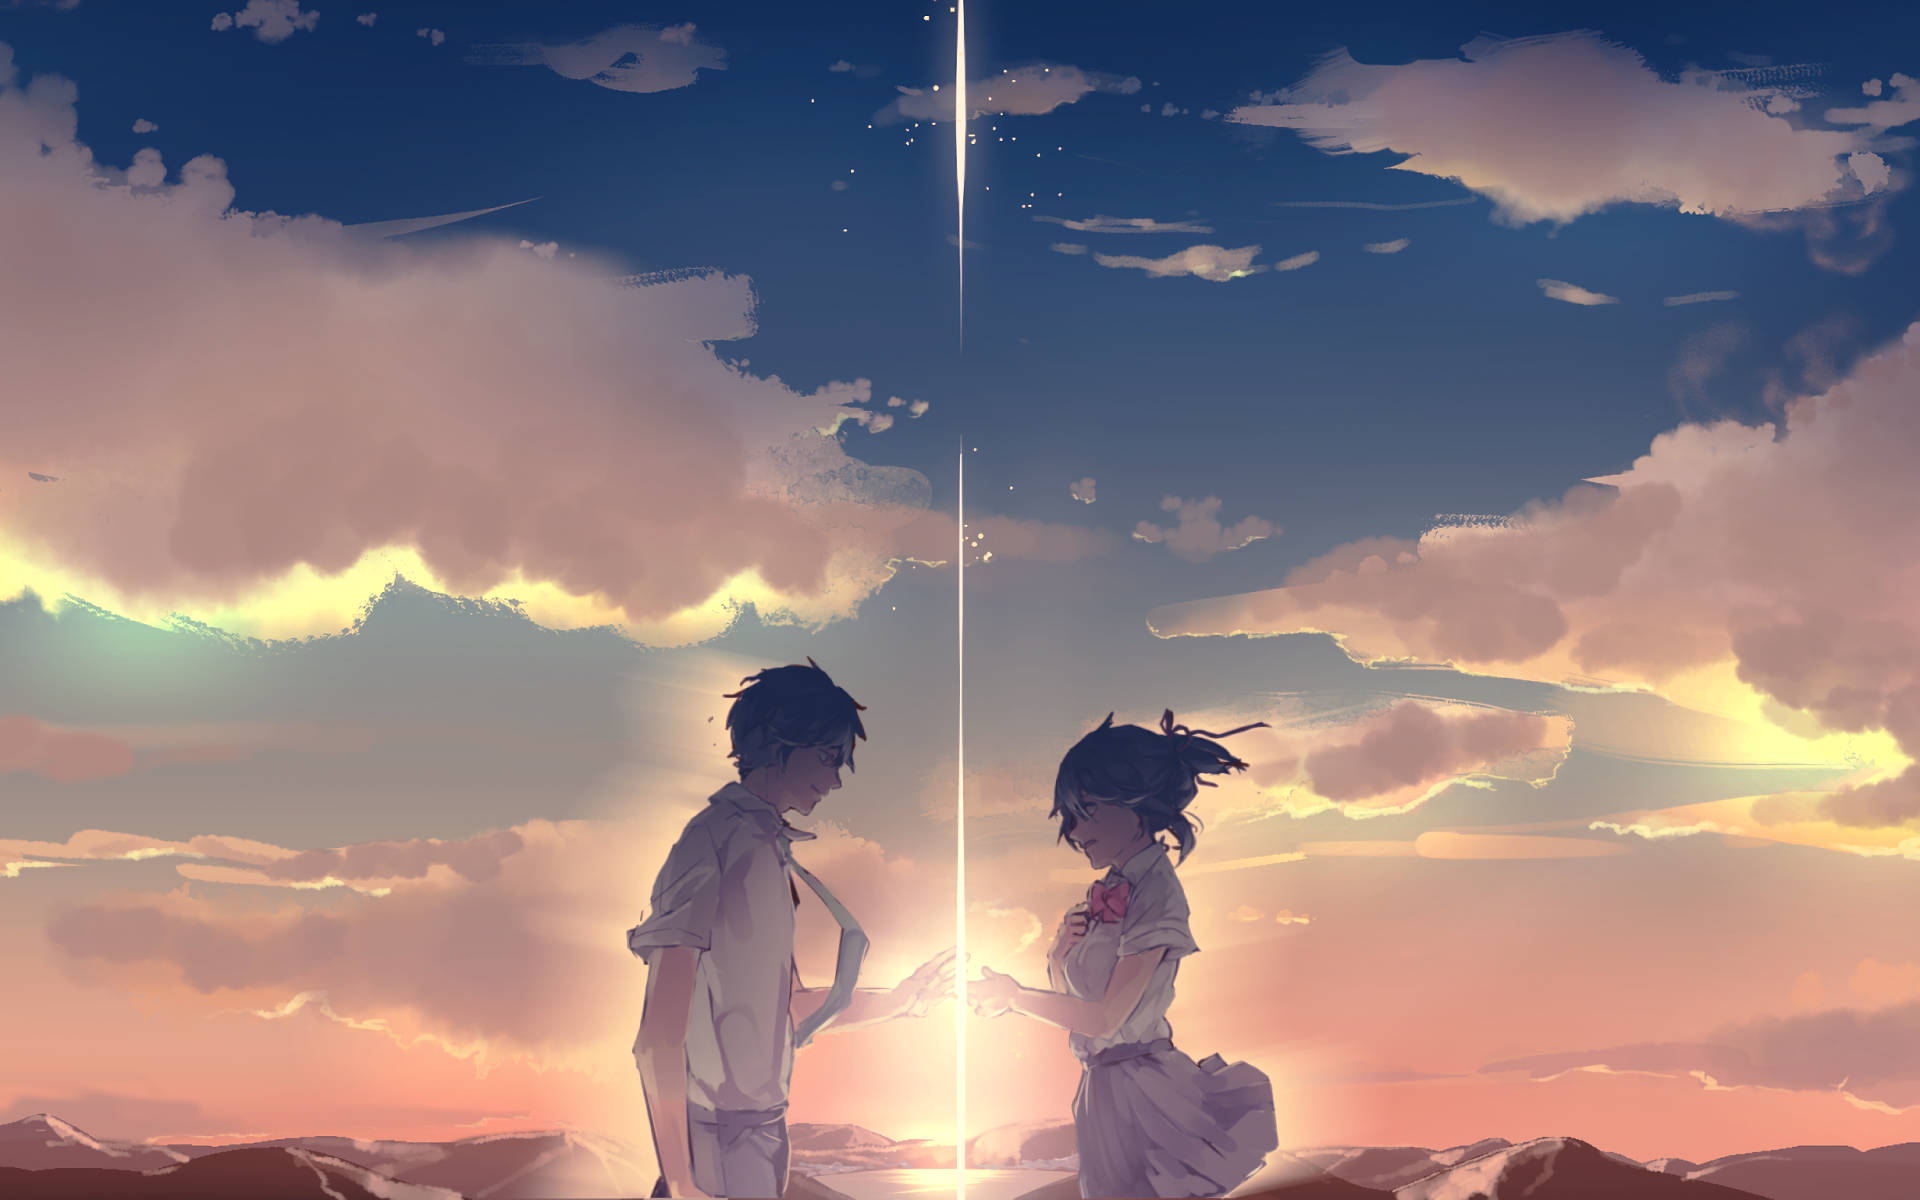 Your Name Anime Aesthetic Sunset Wallpaper